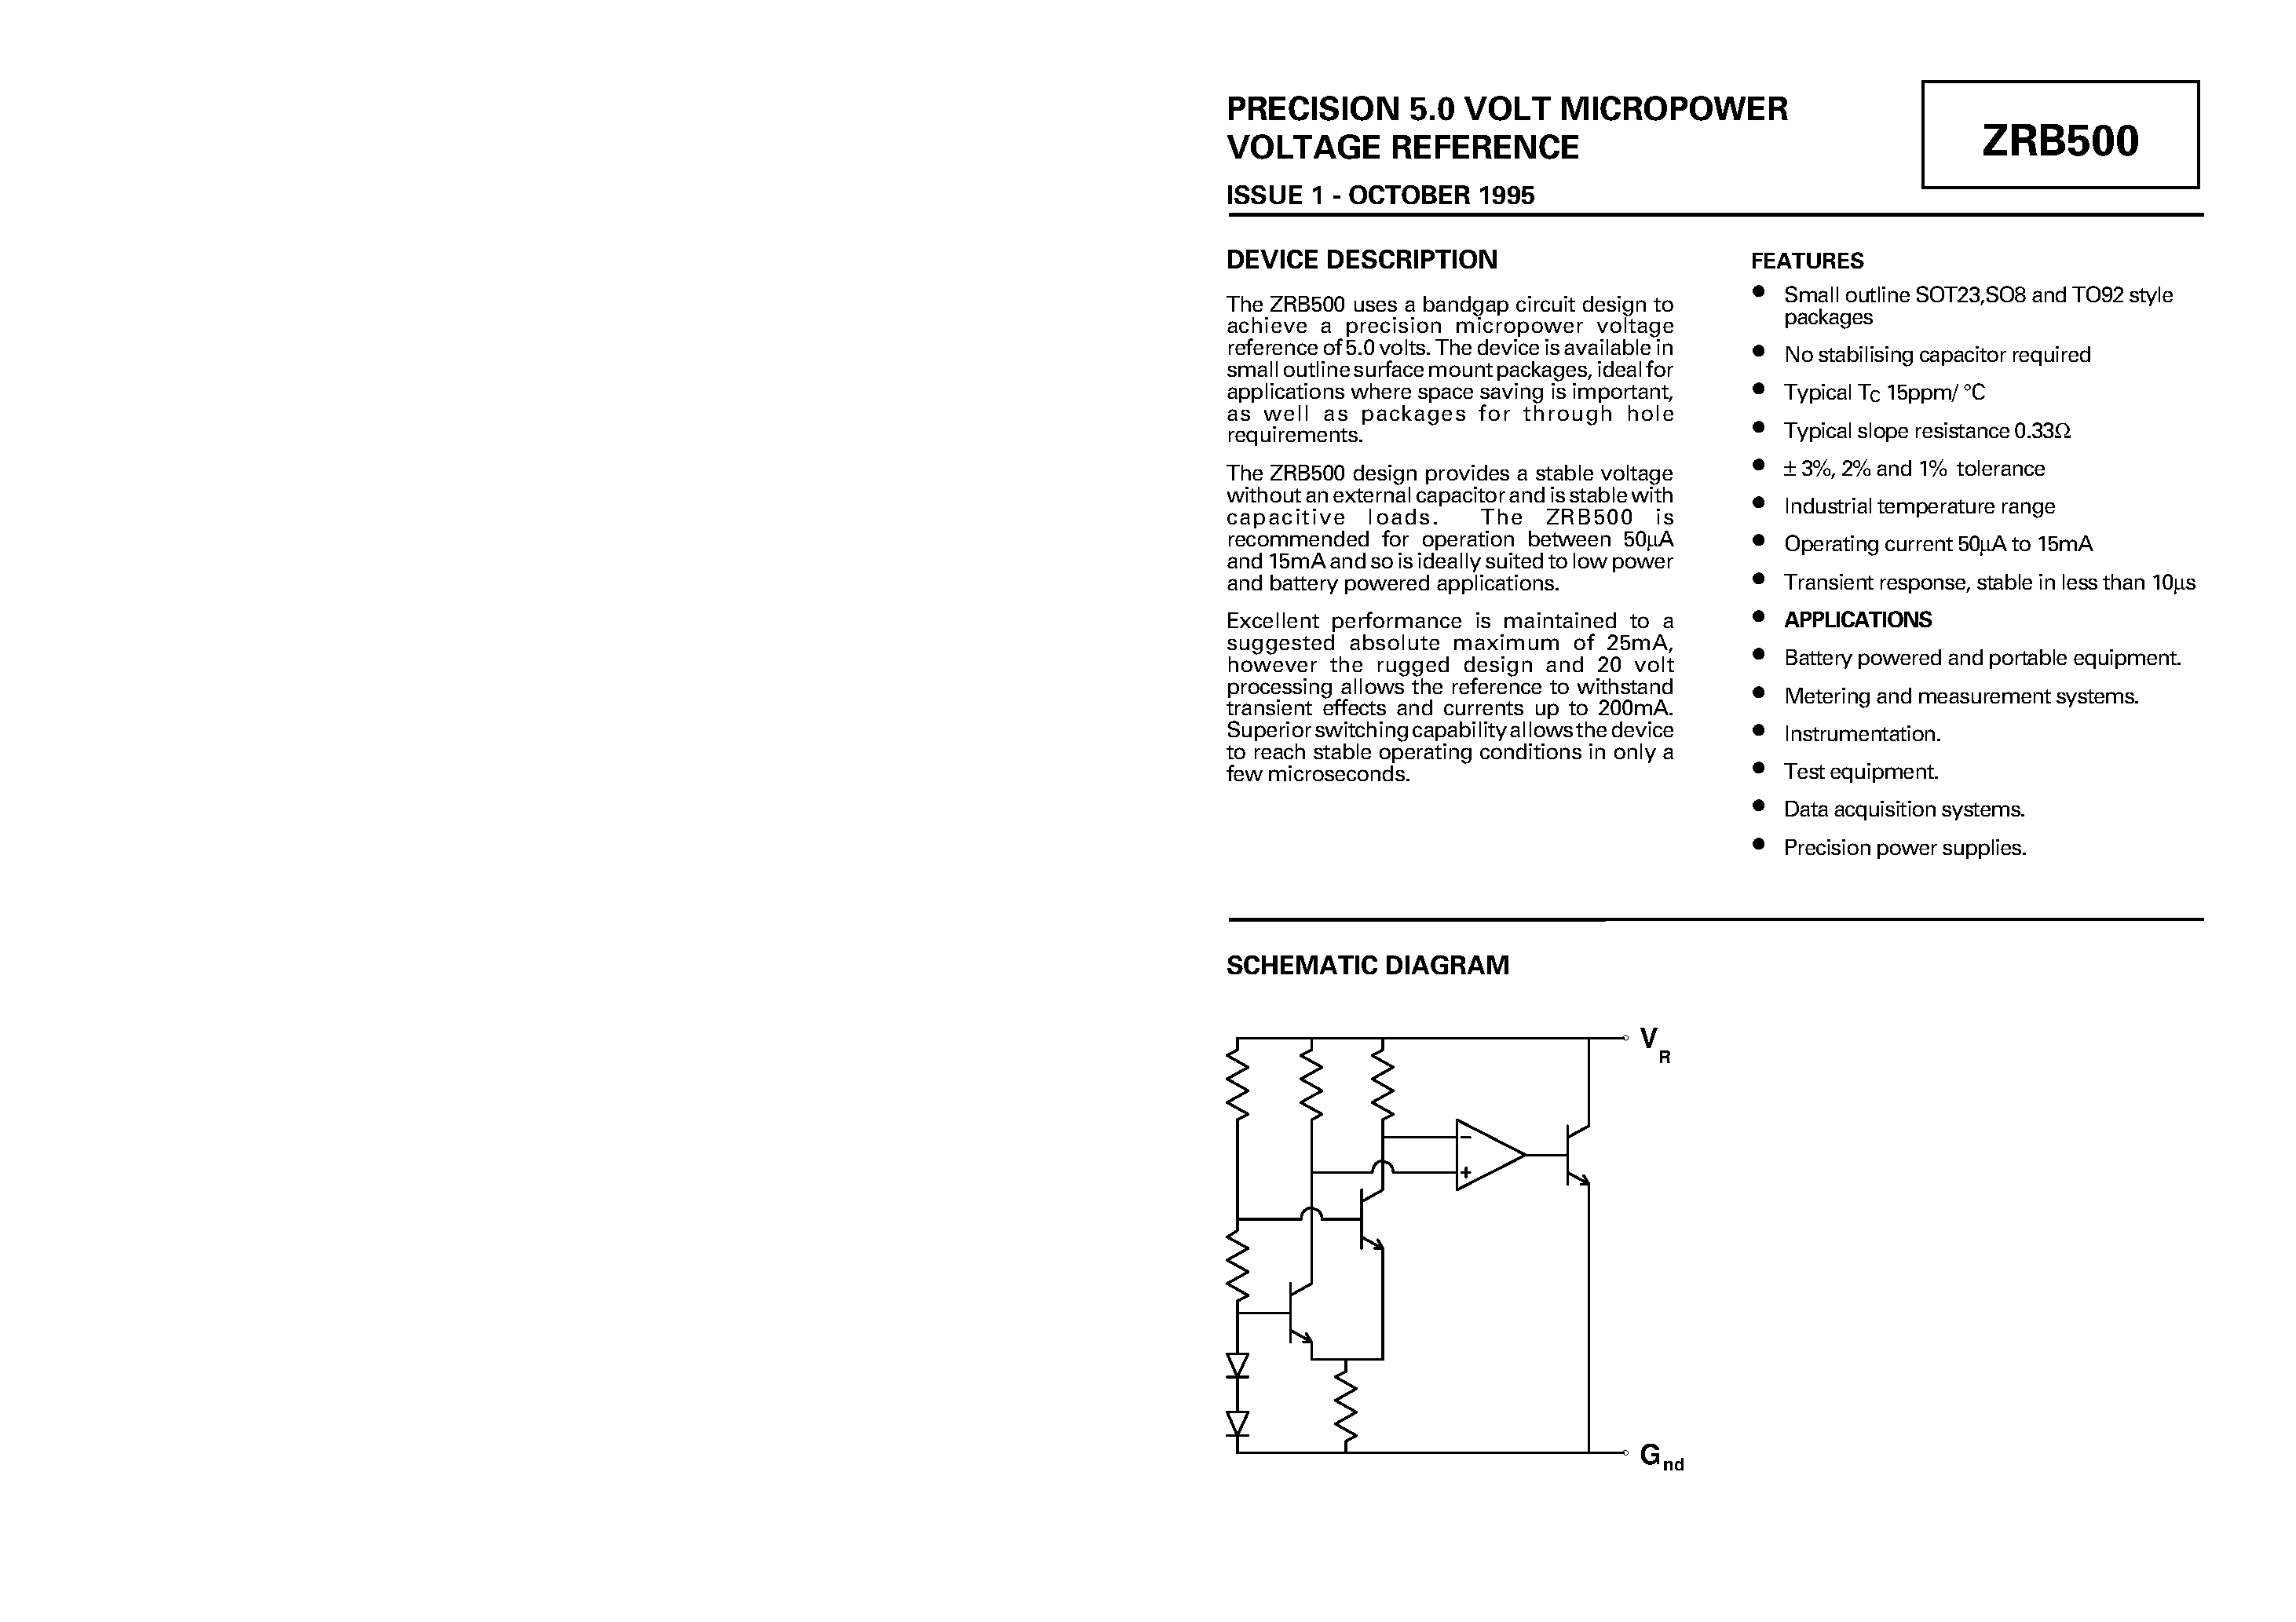 Datasheet ZRB500A01 - PRECISION 5.0 VOLT MICROPOWER VOLTAGE REFERENCE page 1